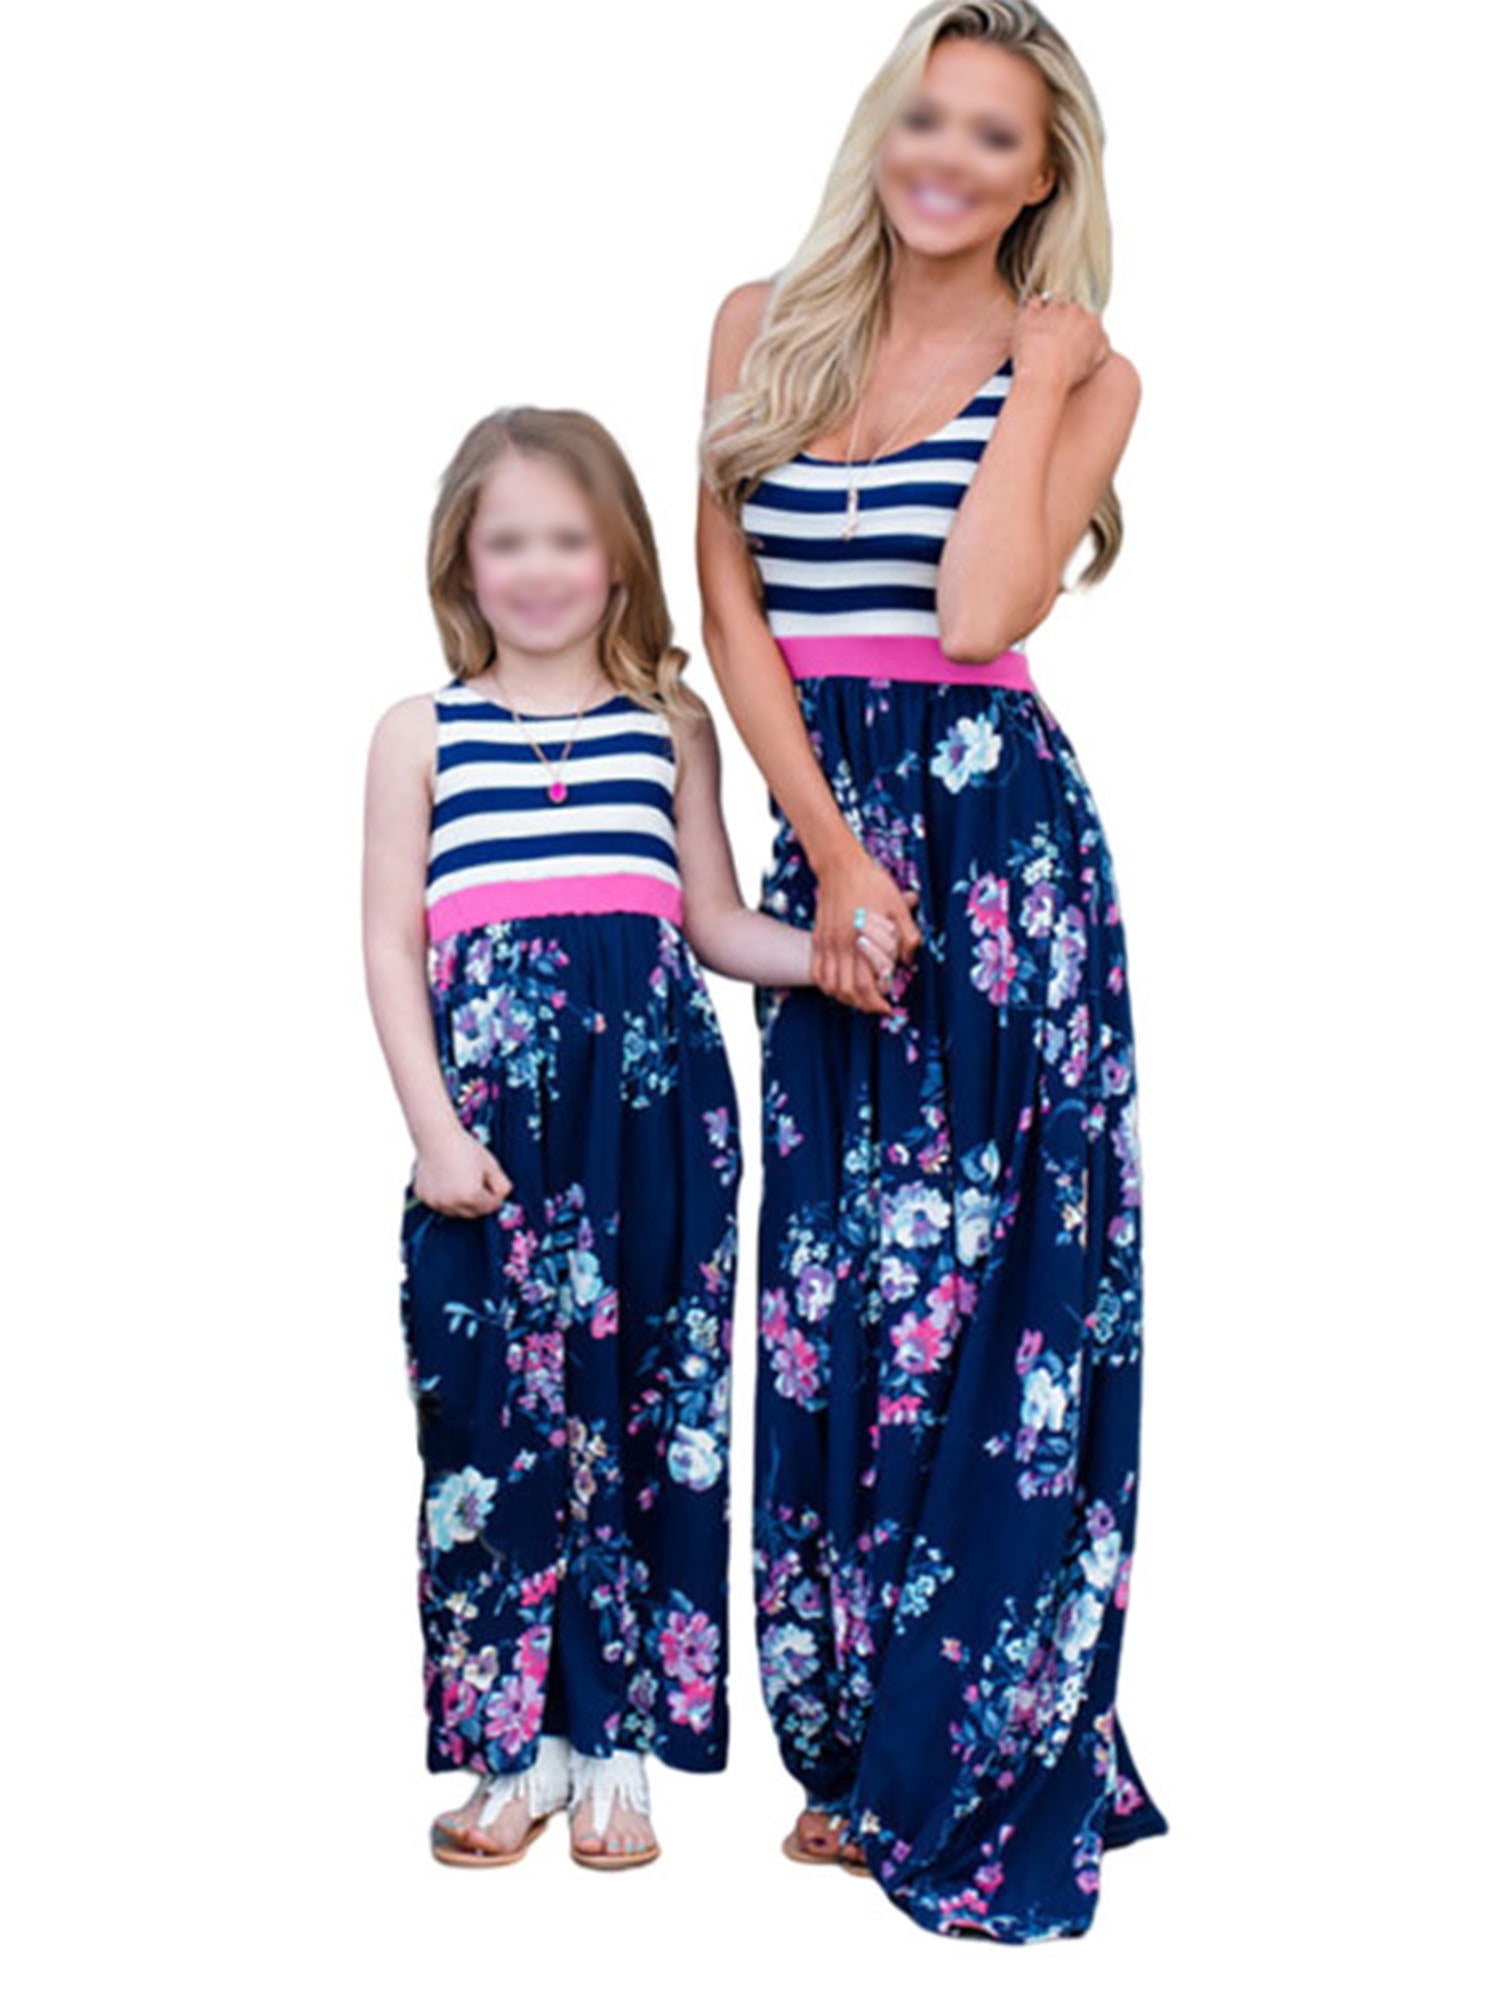 Mother and Daughter Floral Dress Matching Women Kid Girls Casual Family Clothes